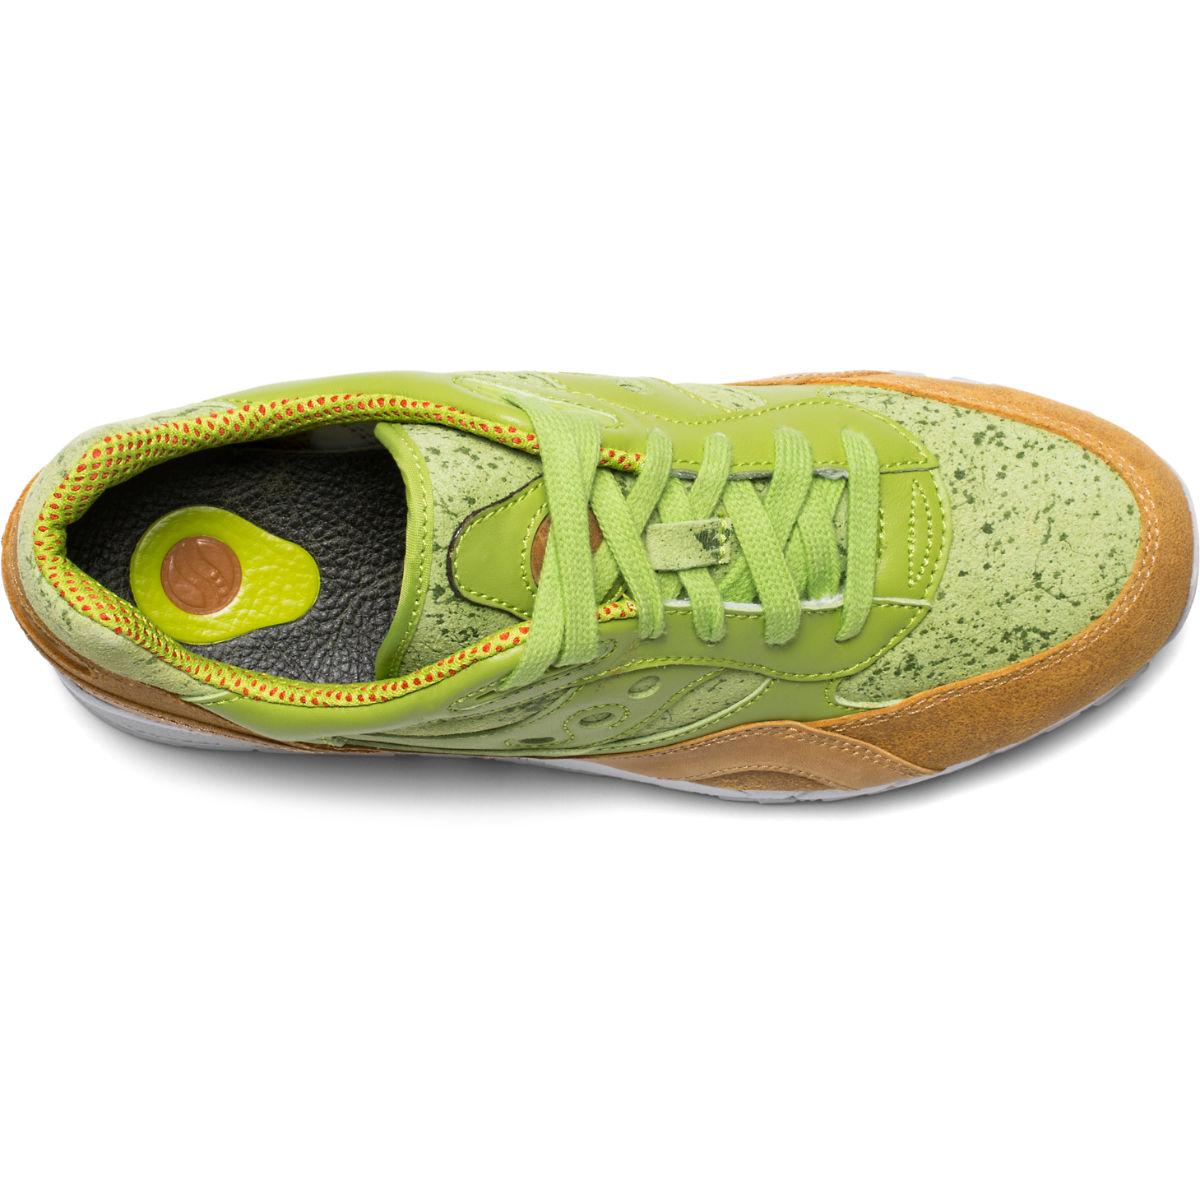 Saucony Leather Shadow 6000 Avocado Toast for Men - Lyst